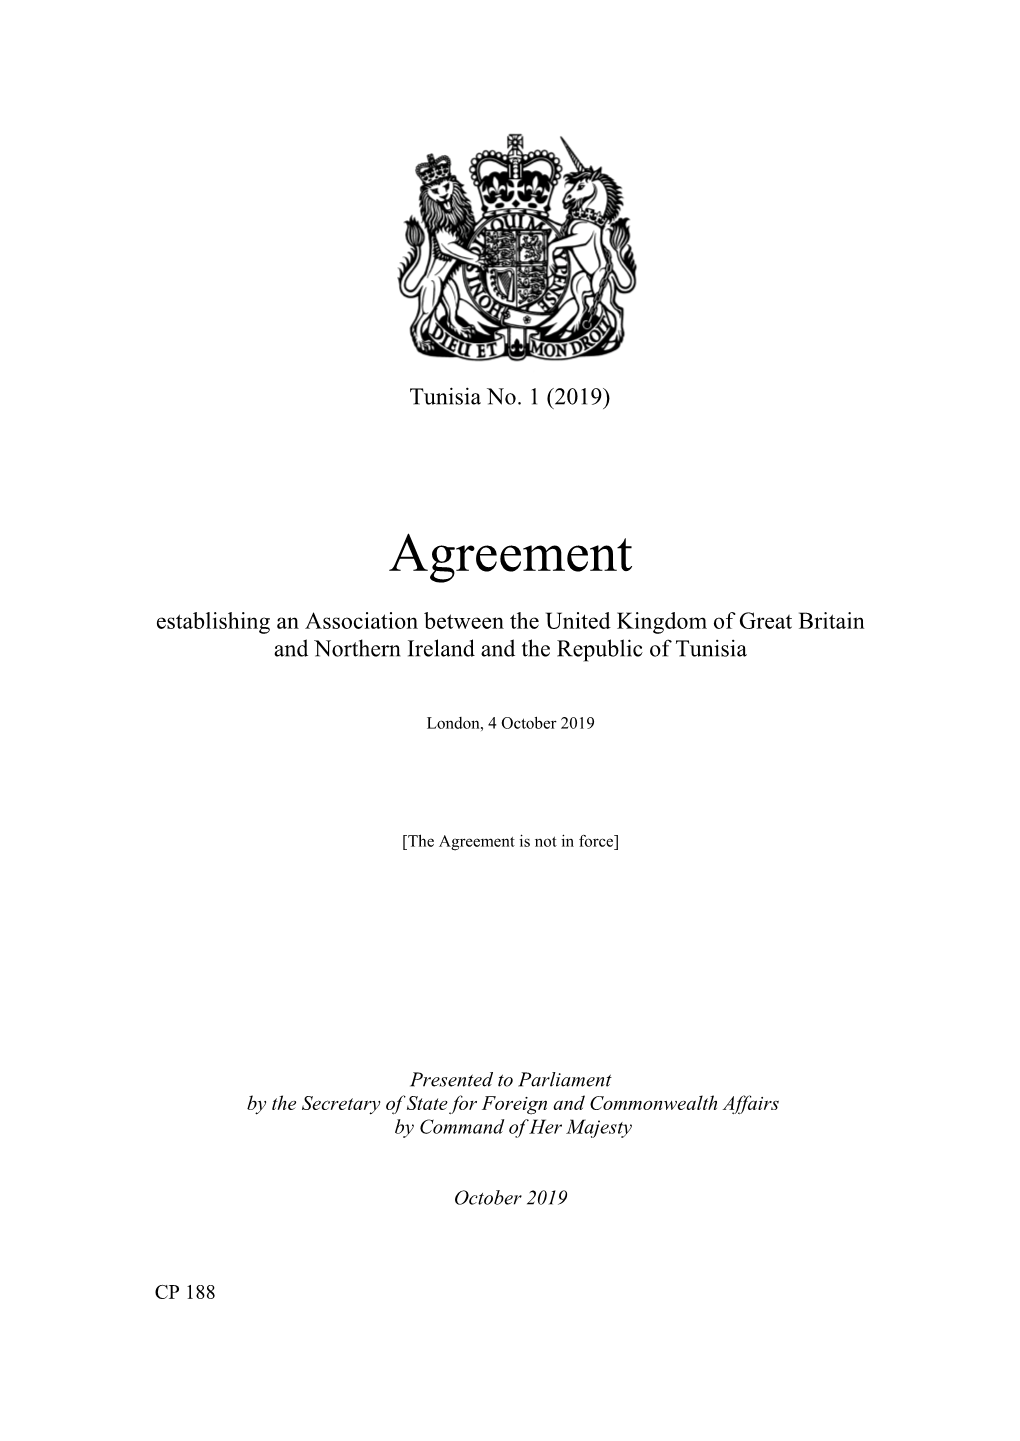 Agreement Establishing an Association Between the United Kingdom of Great Britain and Northern Ireland and the Republic of Tunisia